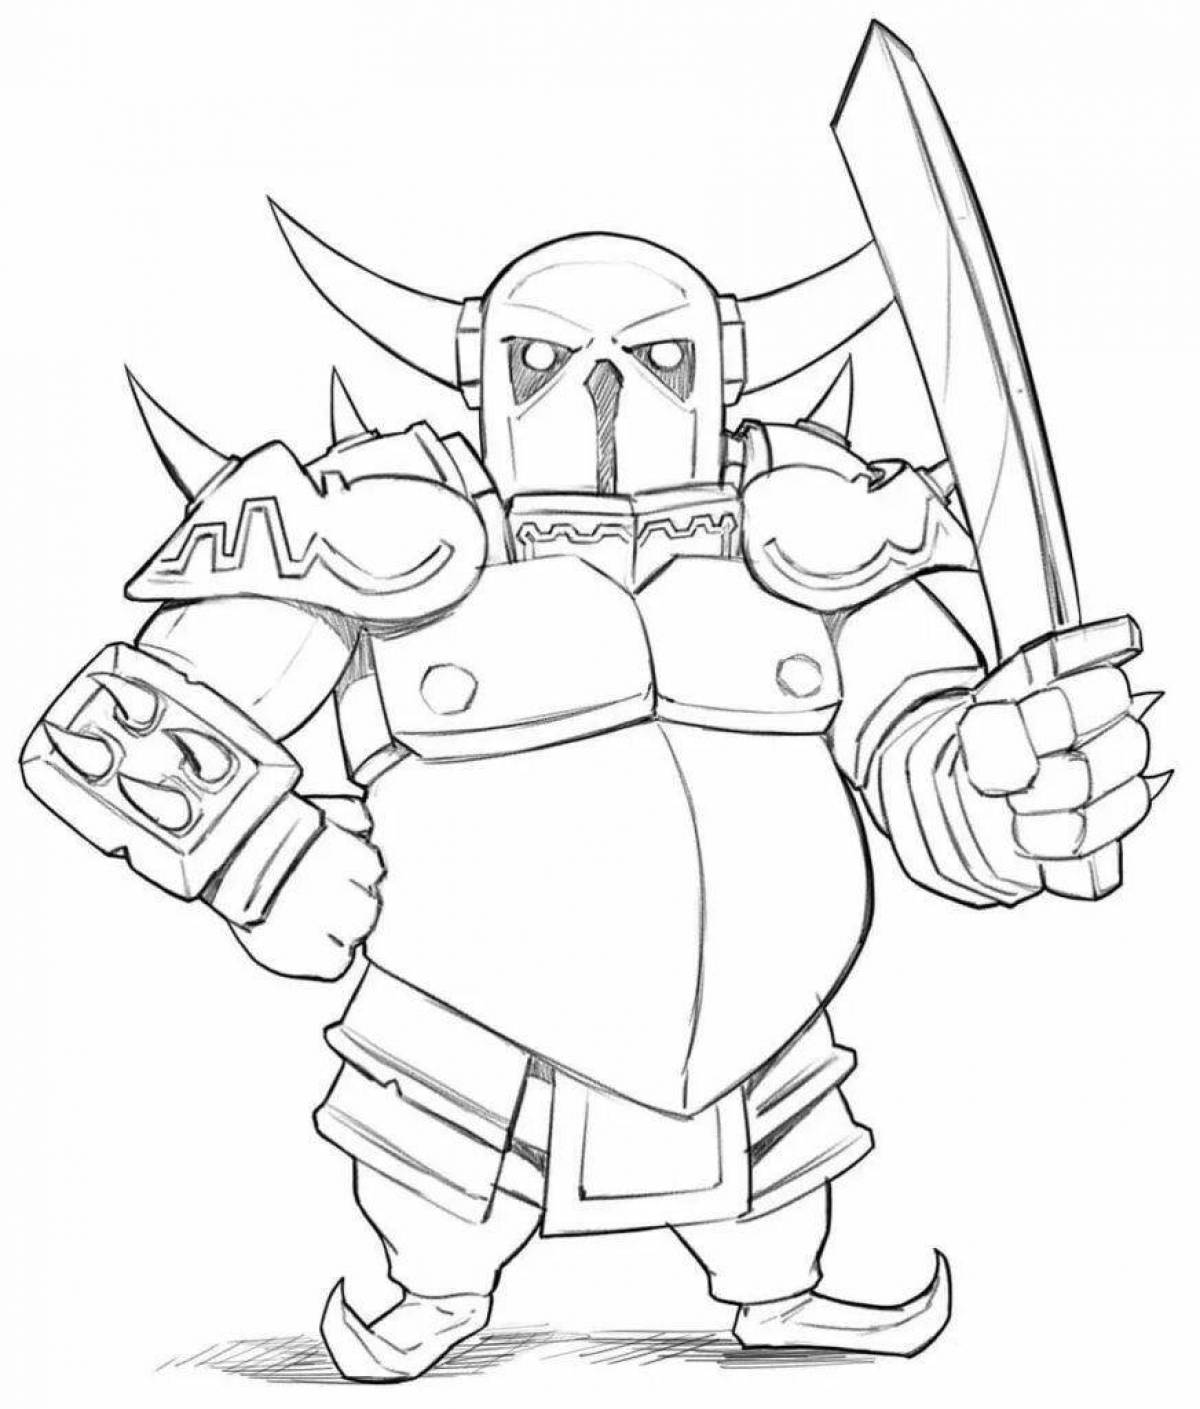 Updating clash royale coloring page